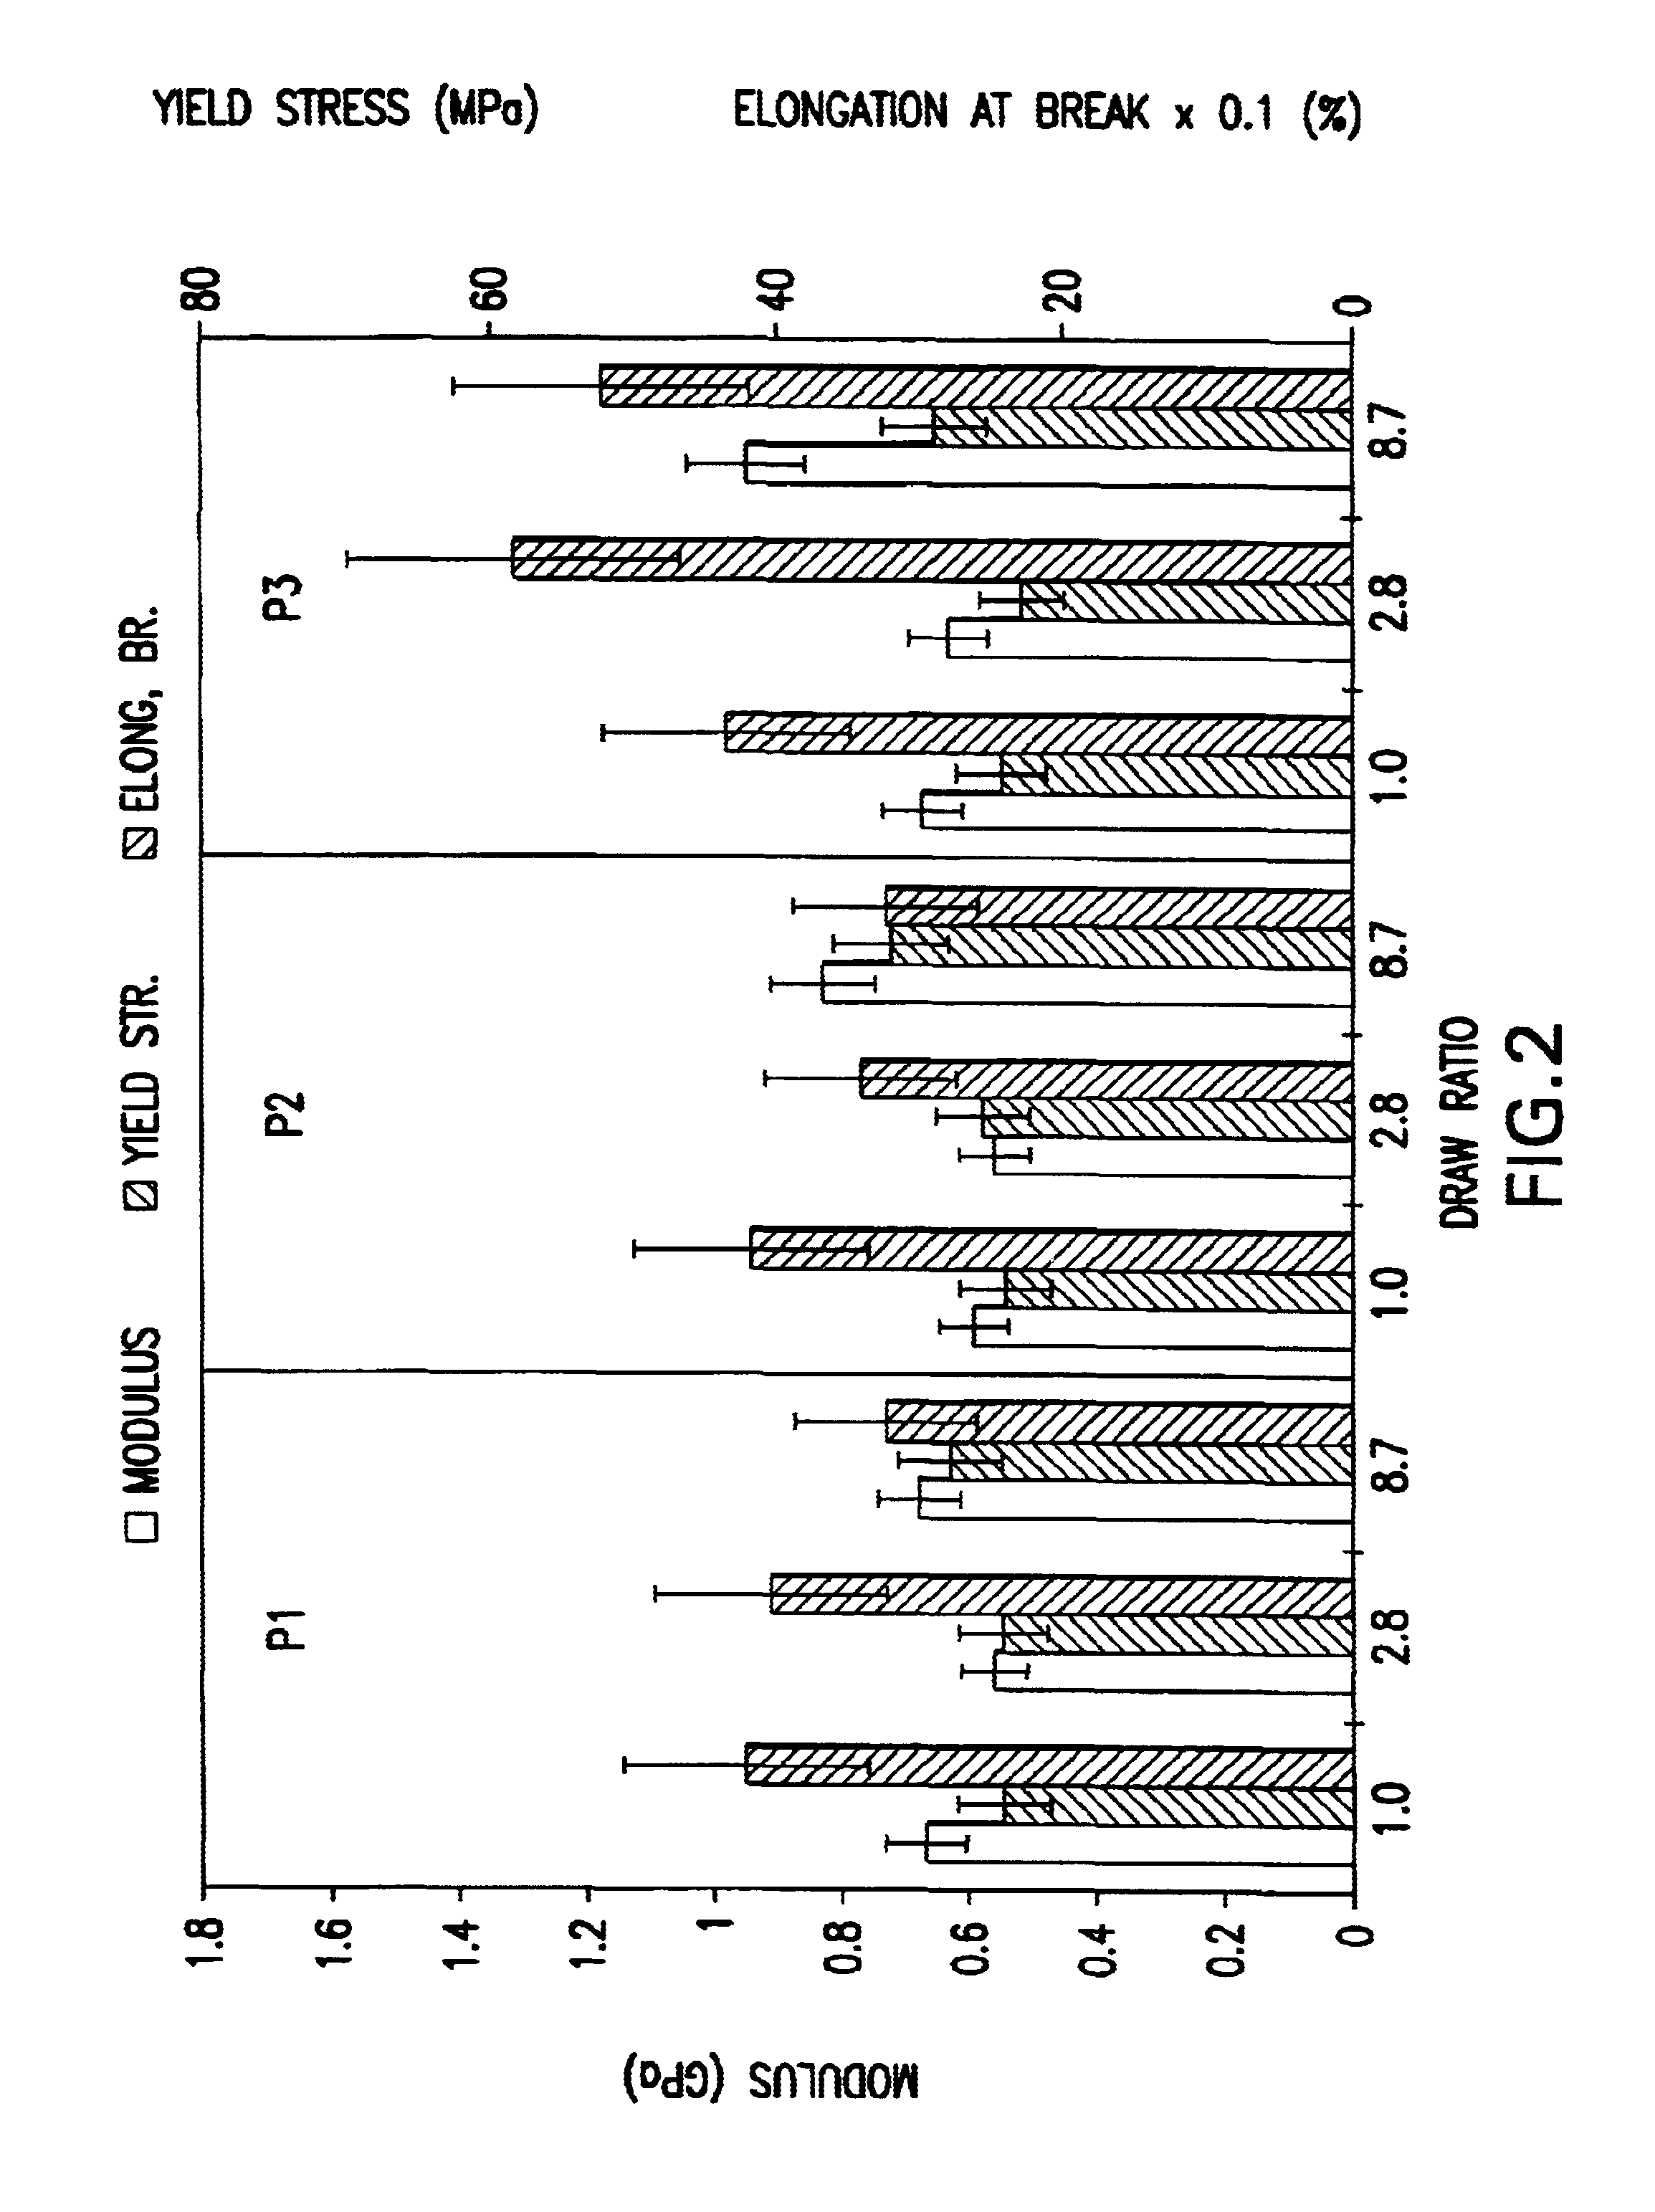 Process for making multiphase polymeric film having a lamellar structure with controlled permeability and/or controlled mechanical properties